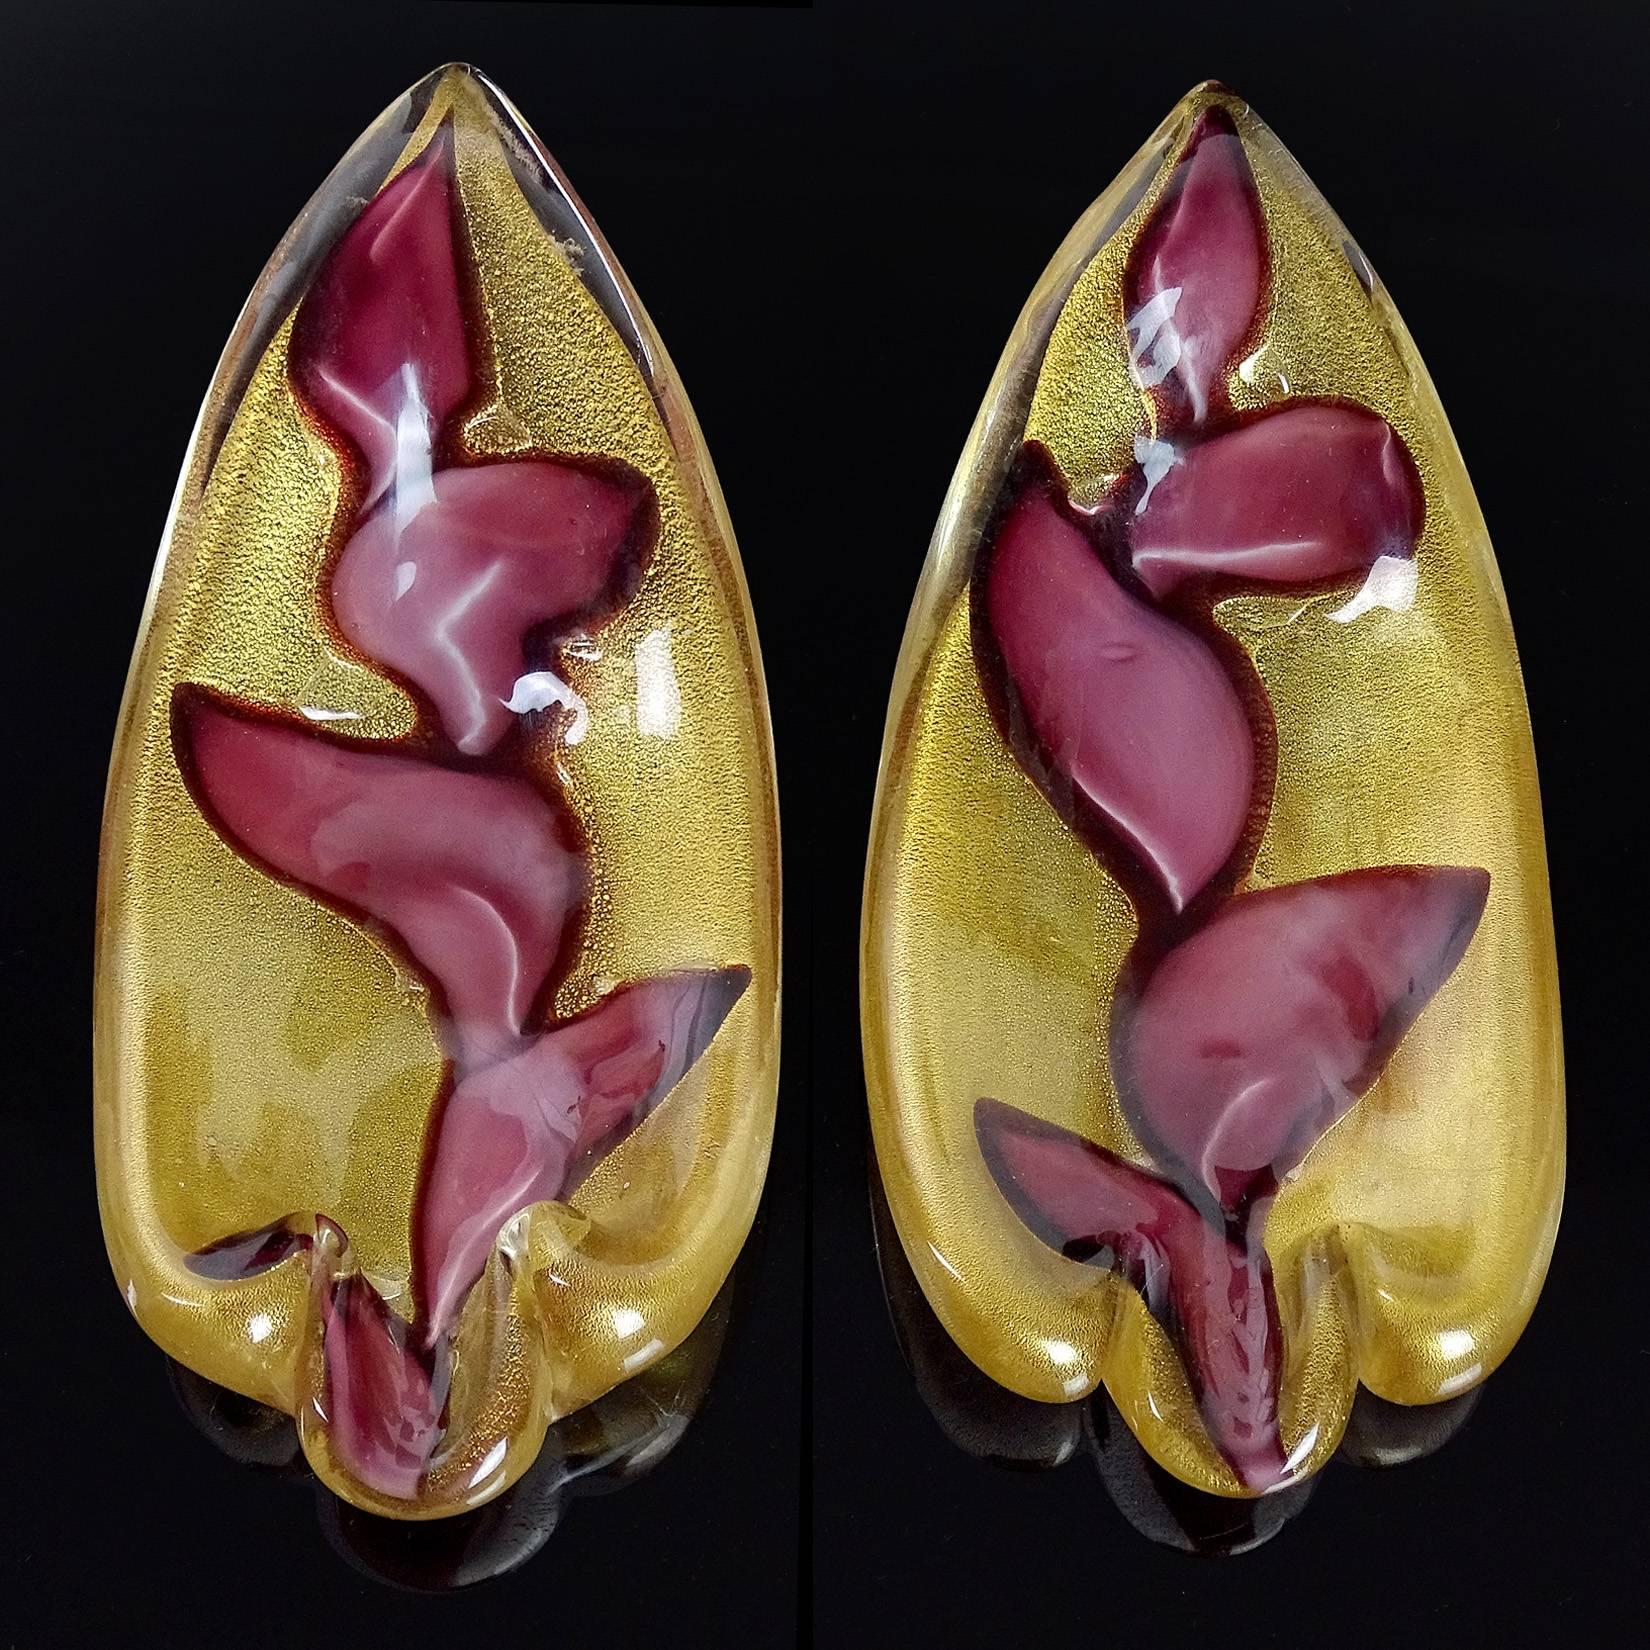 Beautiful vintage Murano handblown gold flecks and purple leaf design Italian art glass low dishes, knife rests or personal ashtrays. Documented to Ercole Barovier for Barovier e Toso, similar to the 